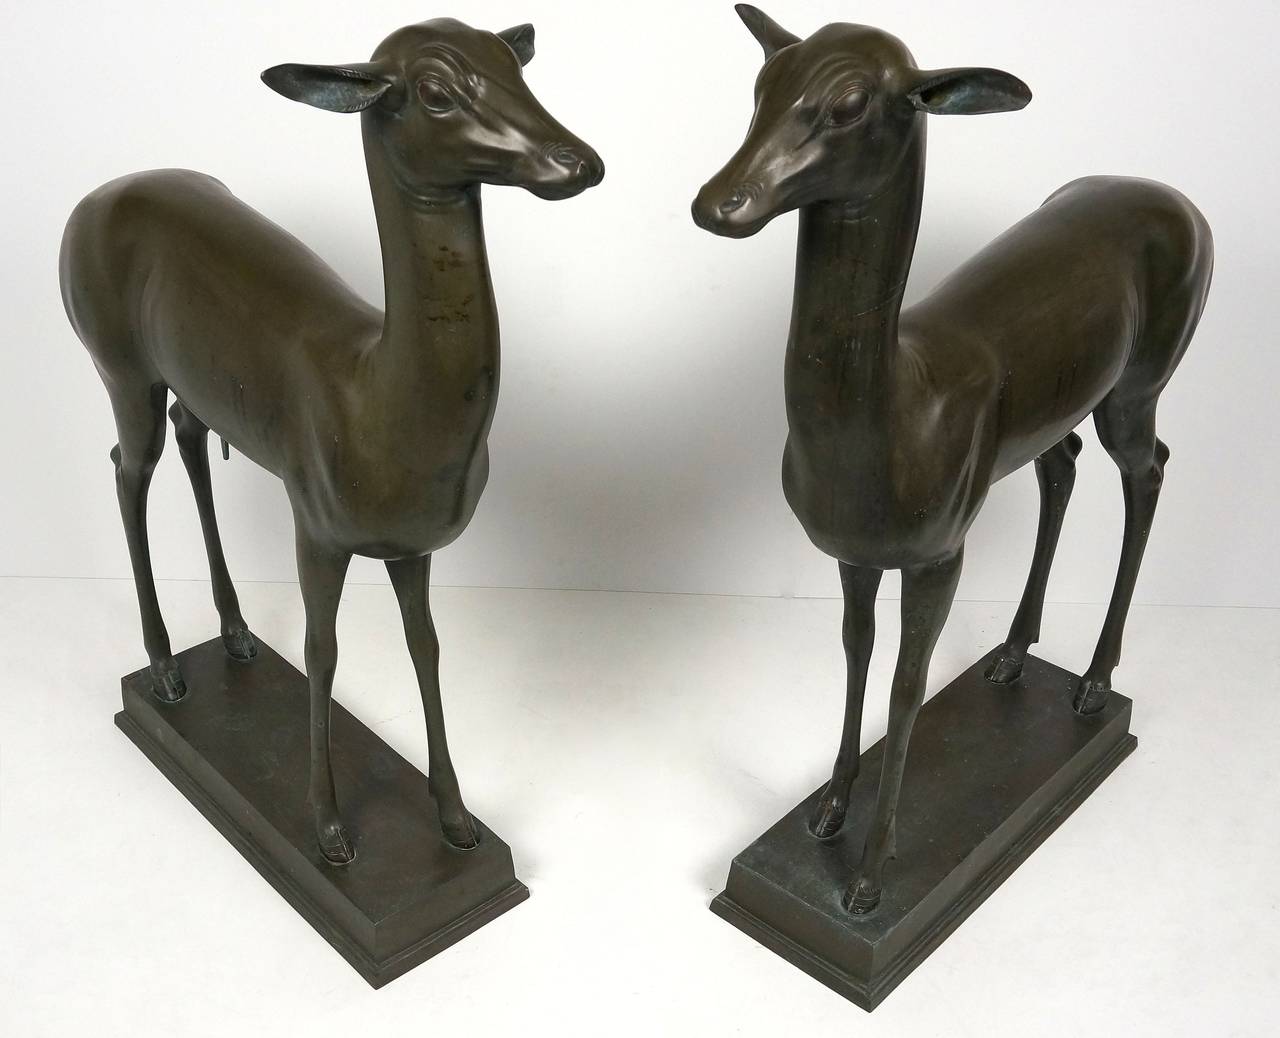 This pair of bronze fawns were recently acquired from an estate in Palm Beach, Florida. The pair of bronze fawns were recast by the firm of Ferdinando Marinelli in Florence, Italy. The pair of fawn were discovered at the Villa dei Papyri in